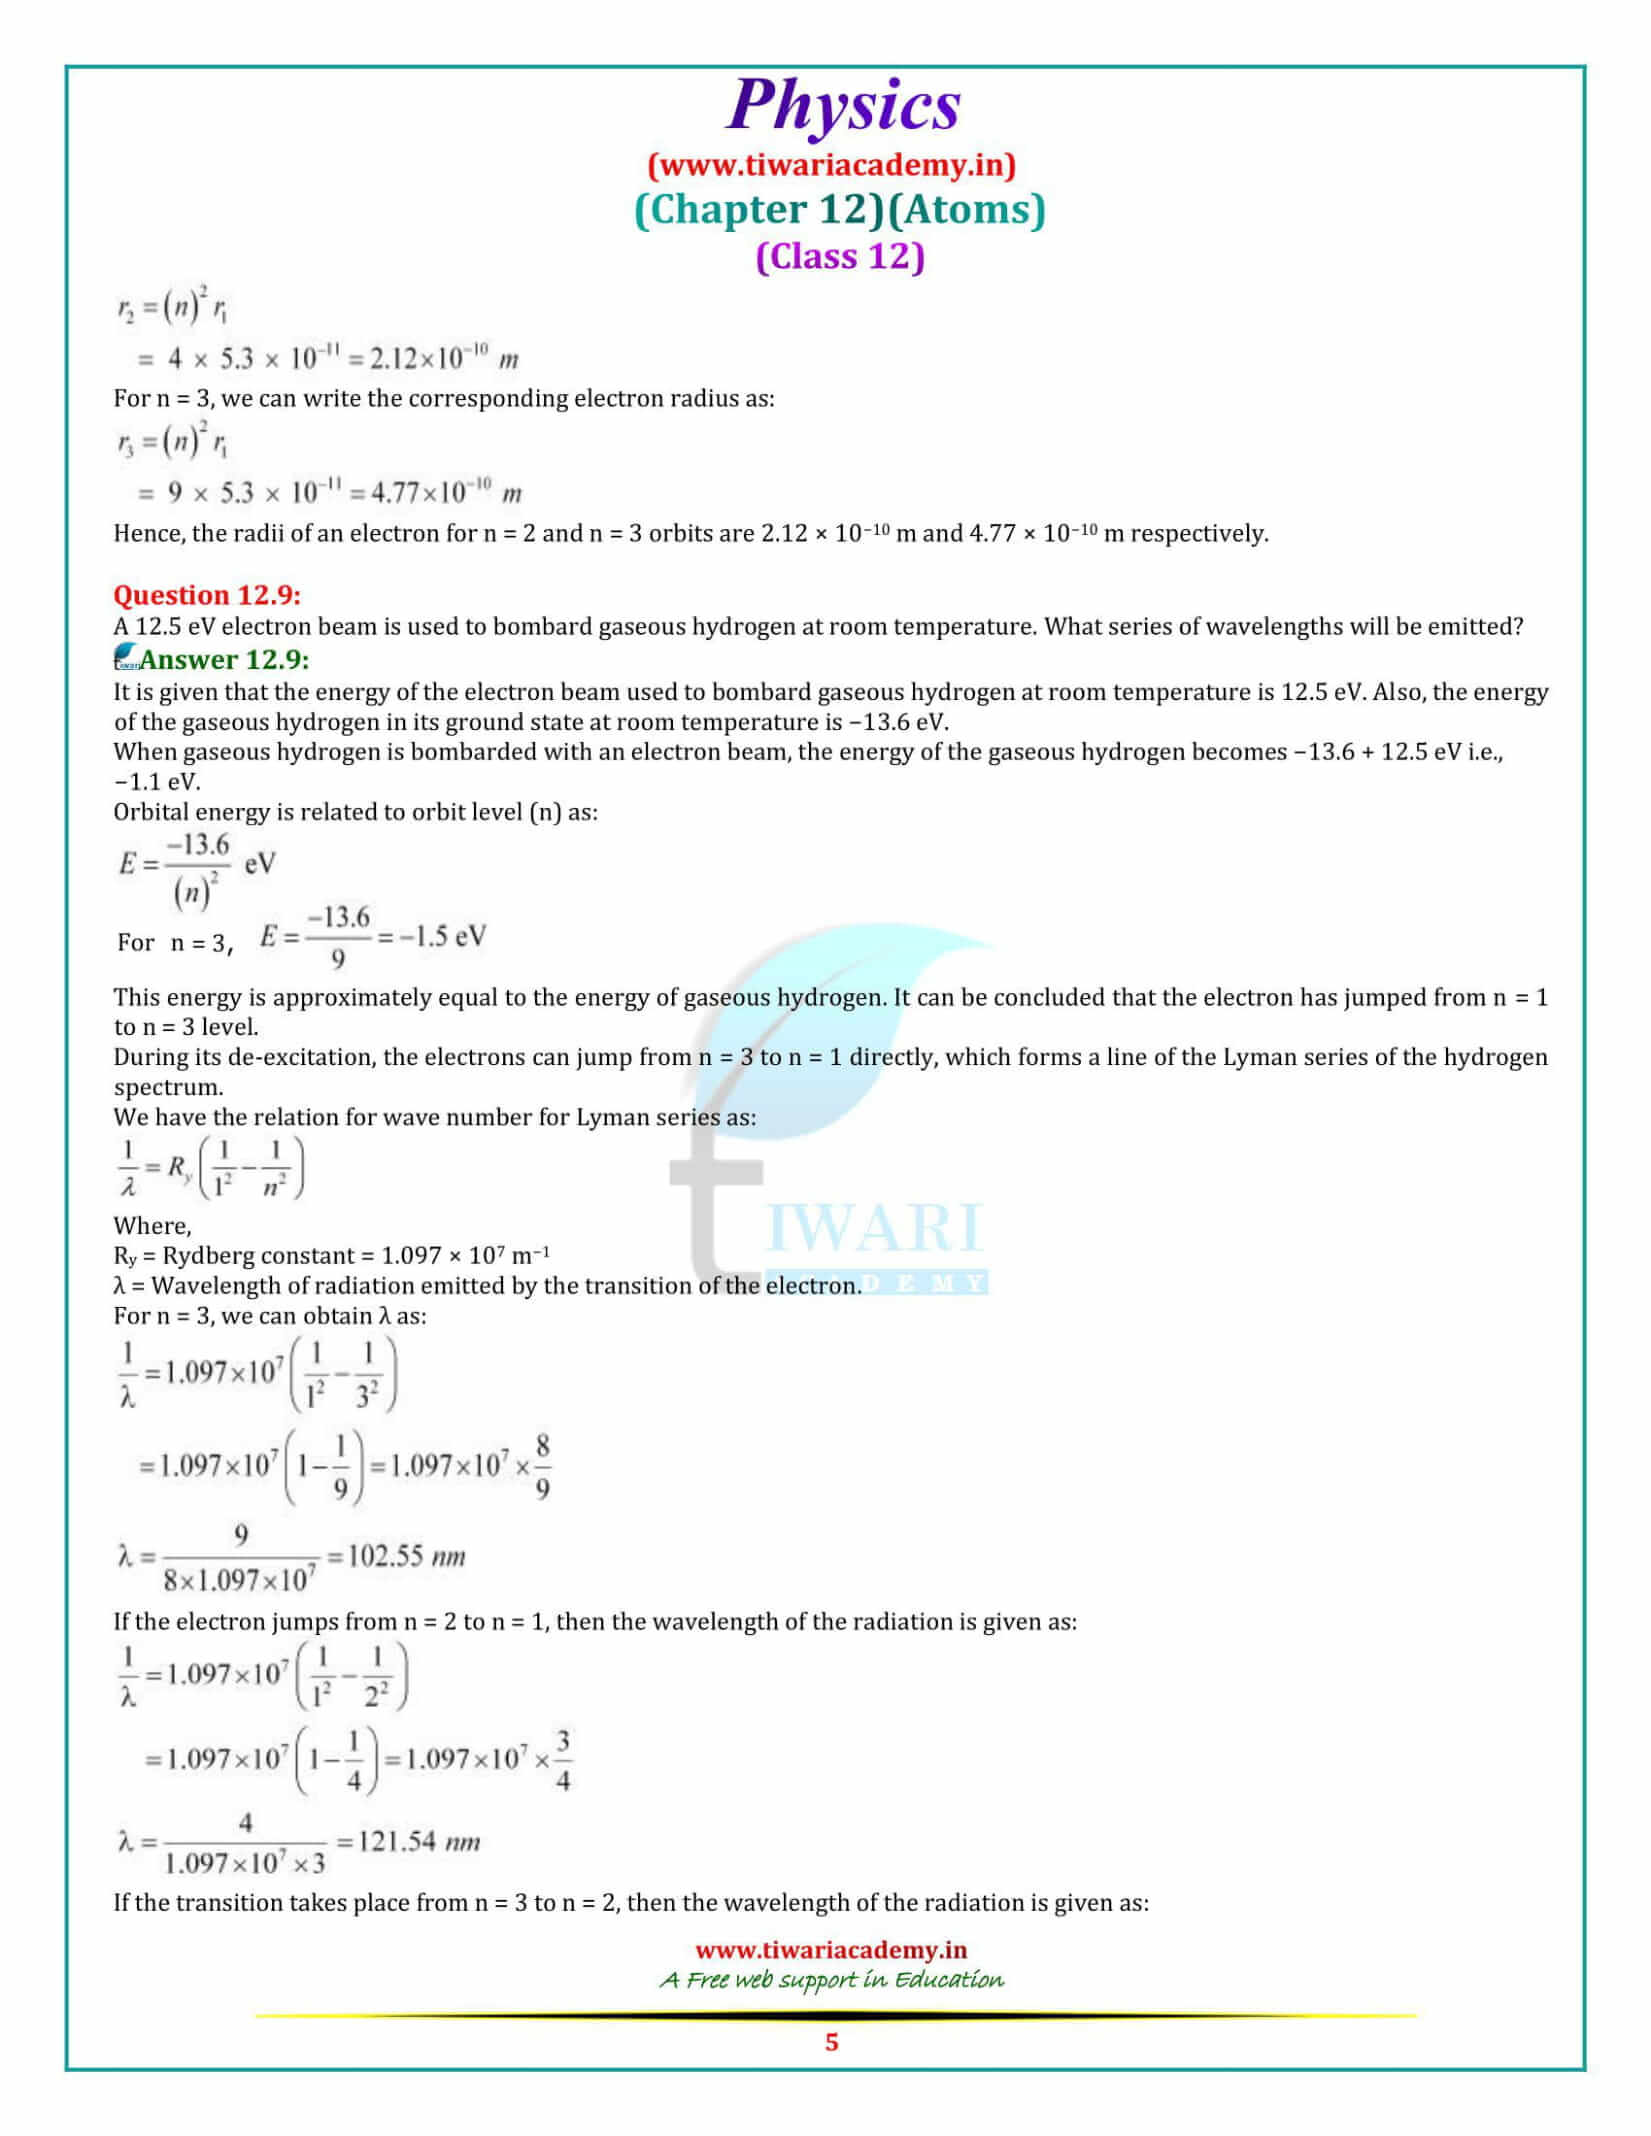 NCERT Solutions for Class 12 Physics Chapter 12 Atom all question answers